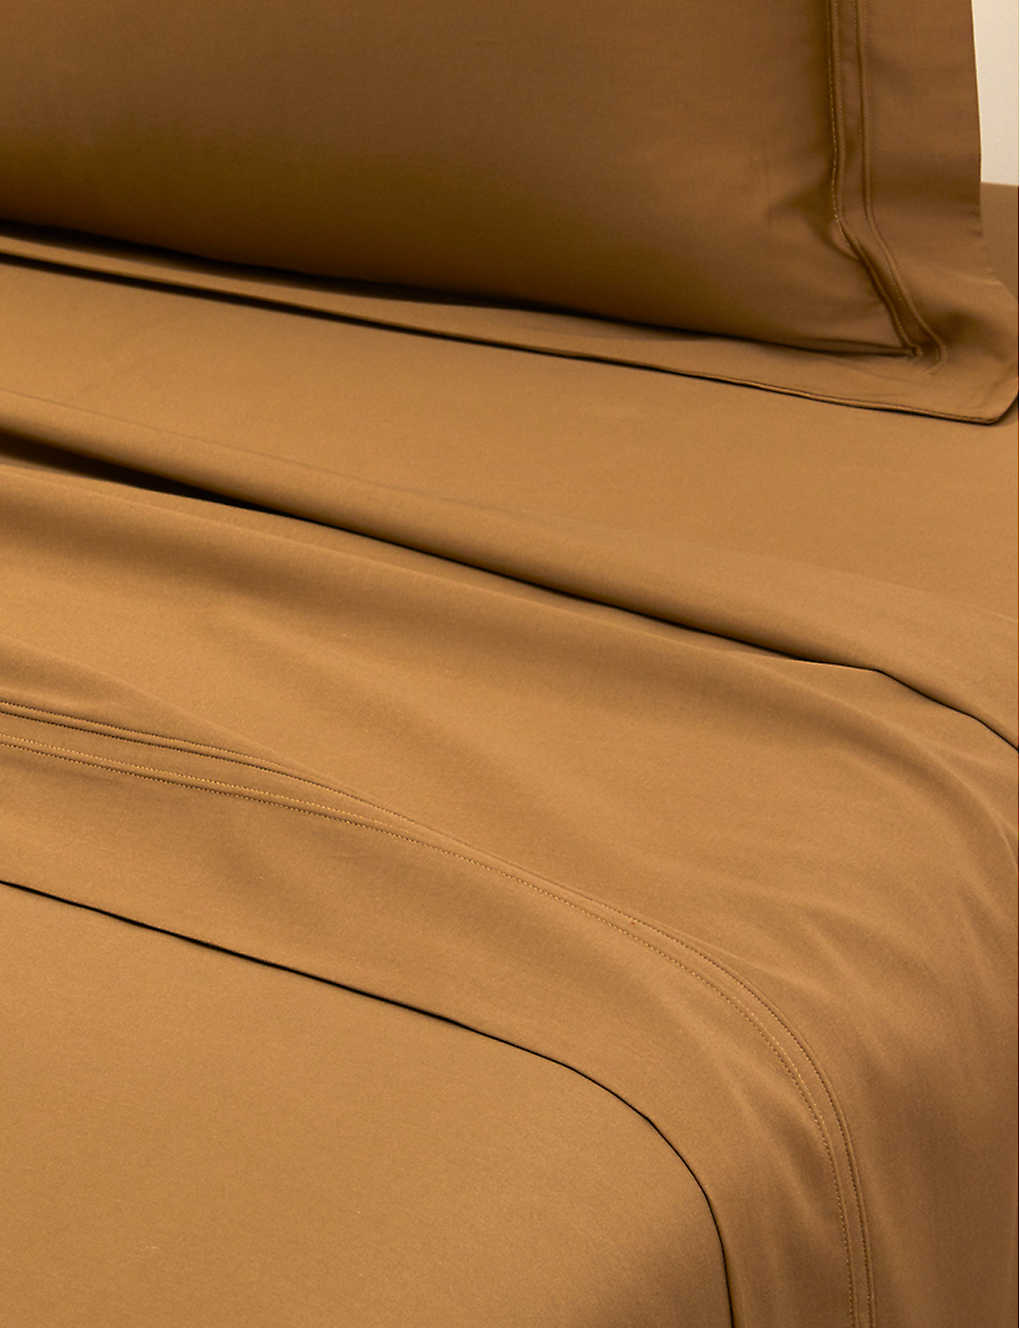 Yves Delorme Bronze Triomphe Organic Cotton-sateen Flat Double Bed Sheet 240cm X 295cm